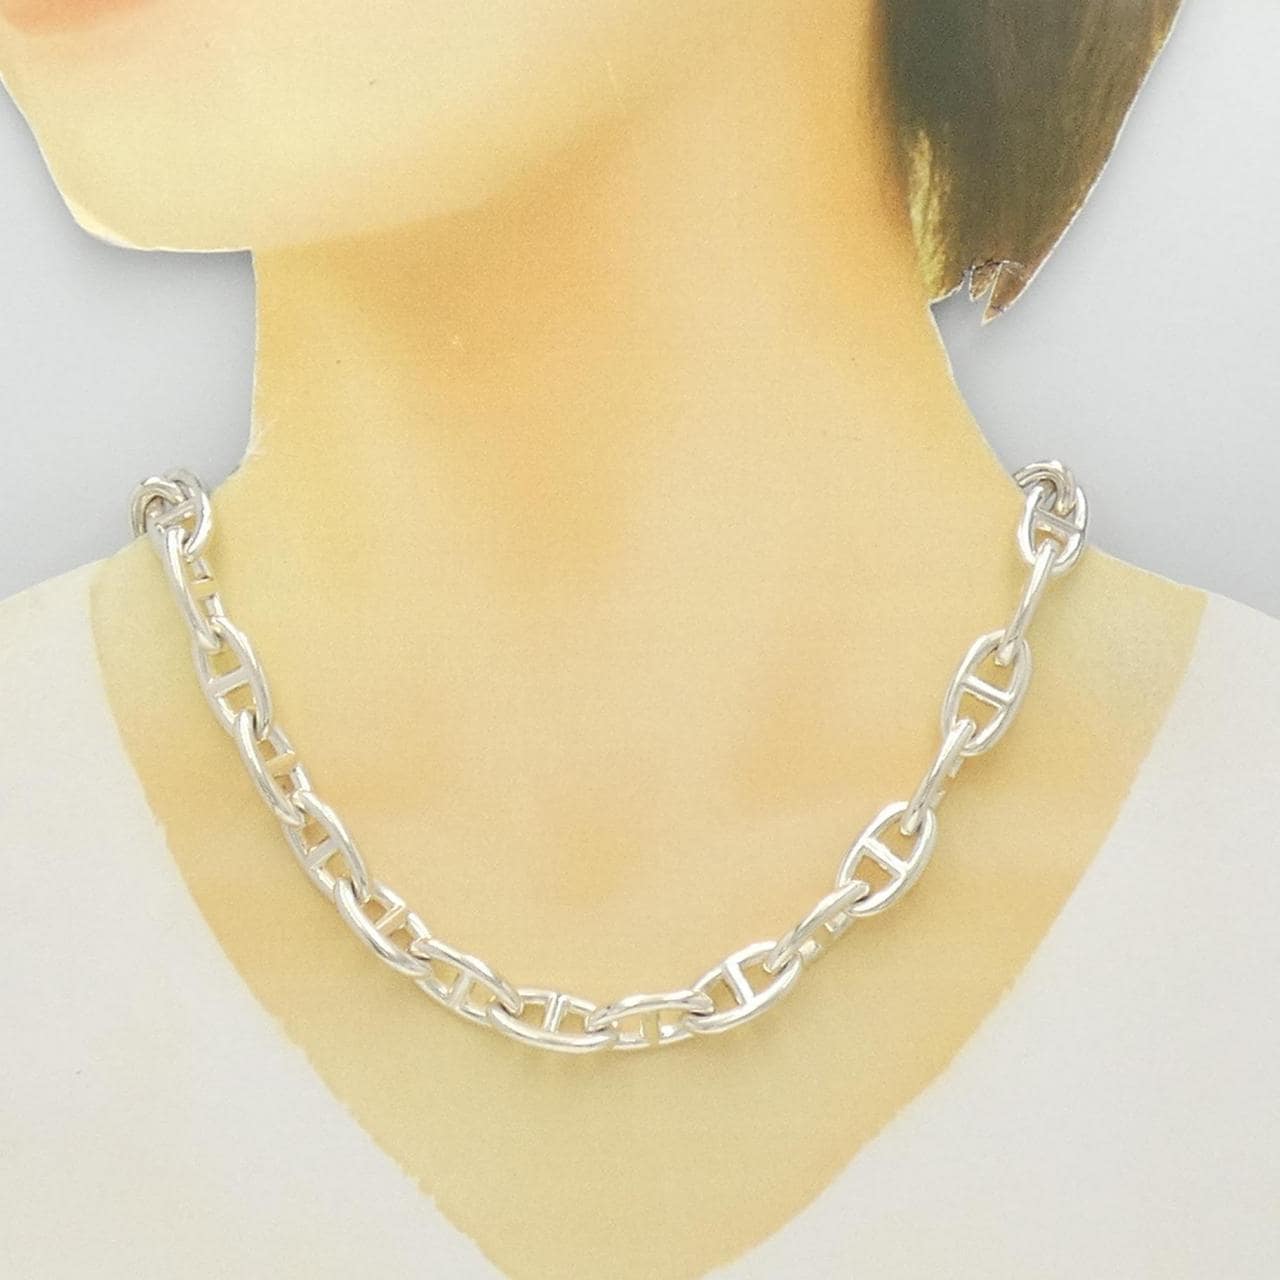 Hermes Gold Chain D'Ancre Long Link Necklace | Steven Fox Jewelry